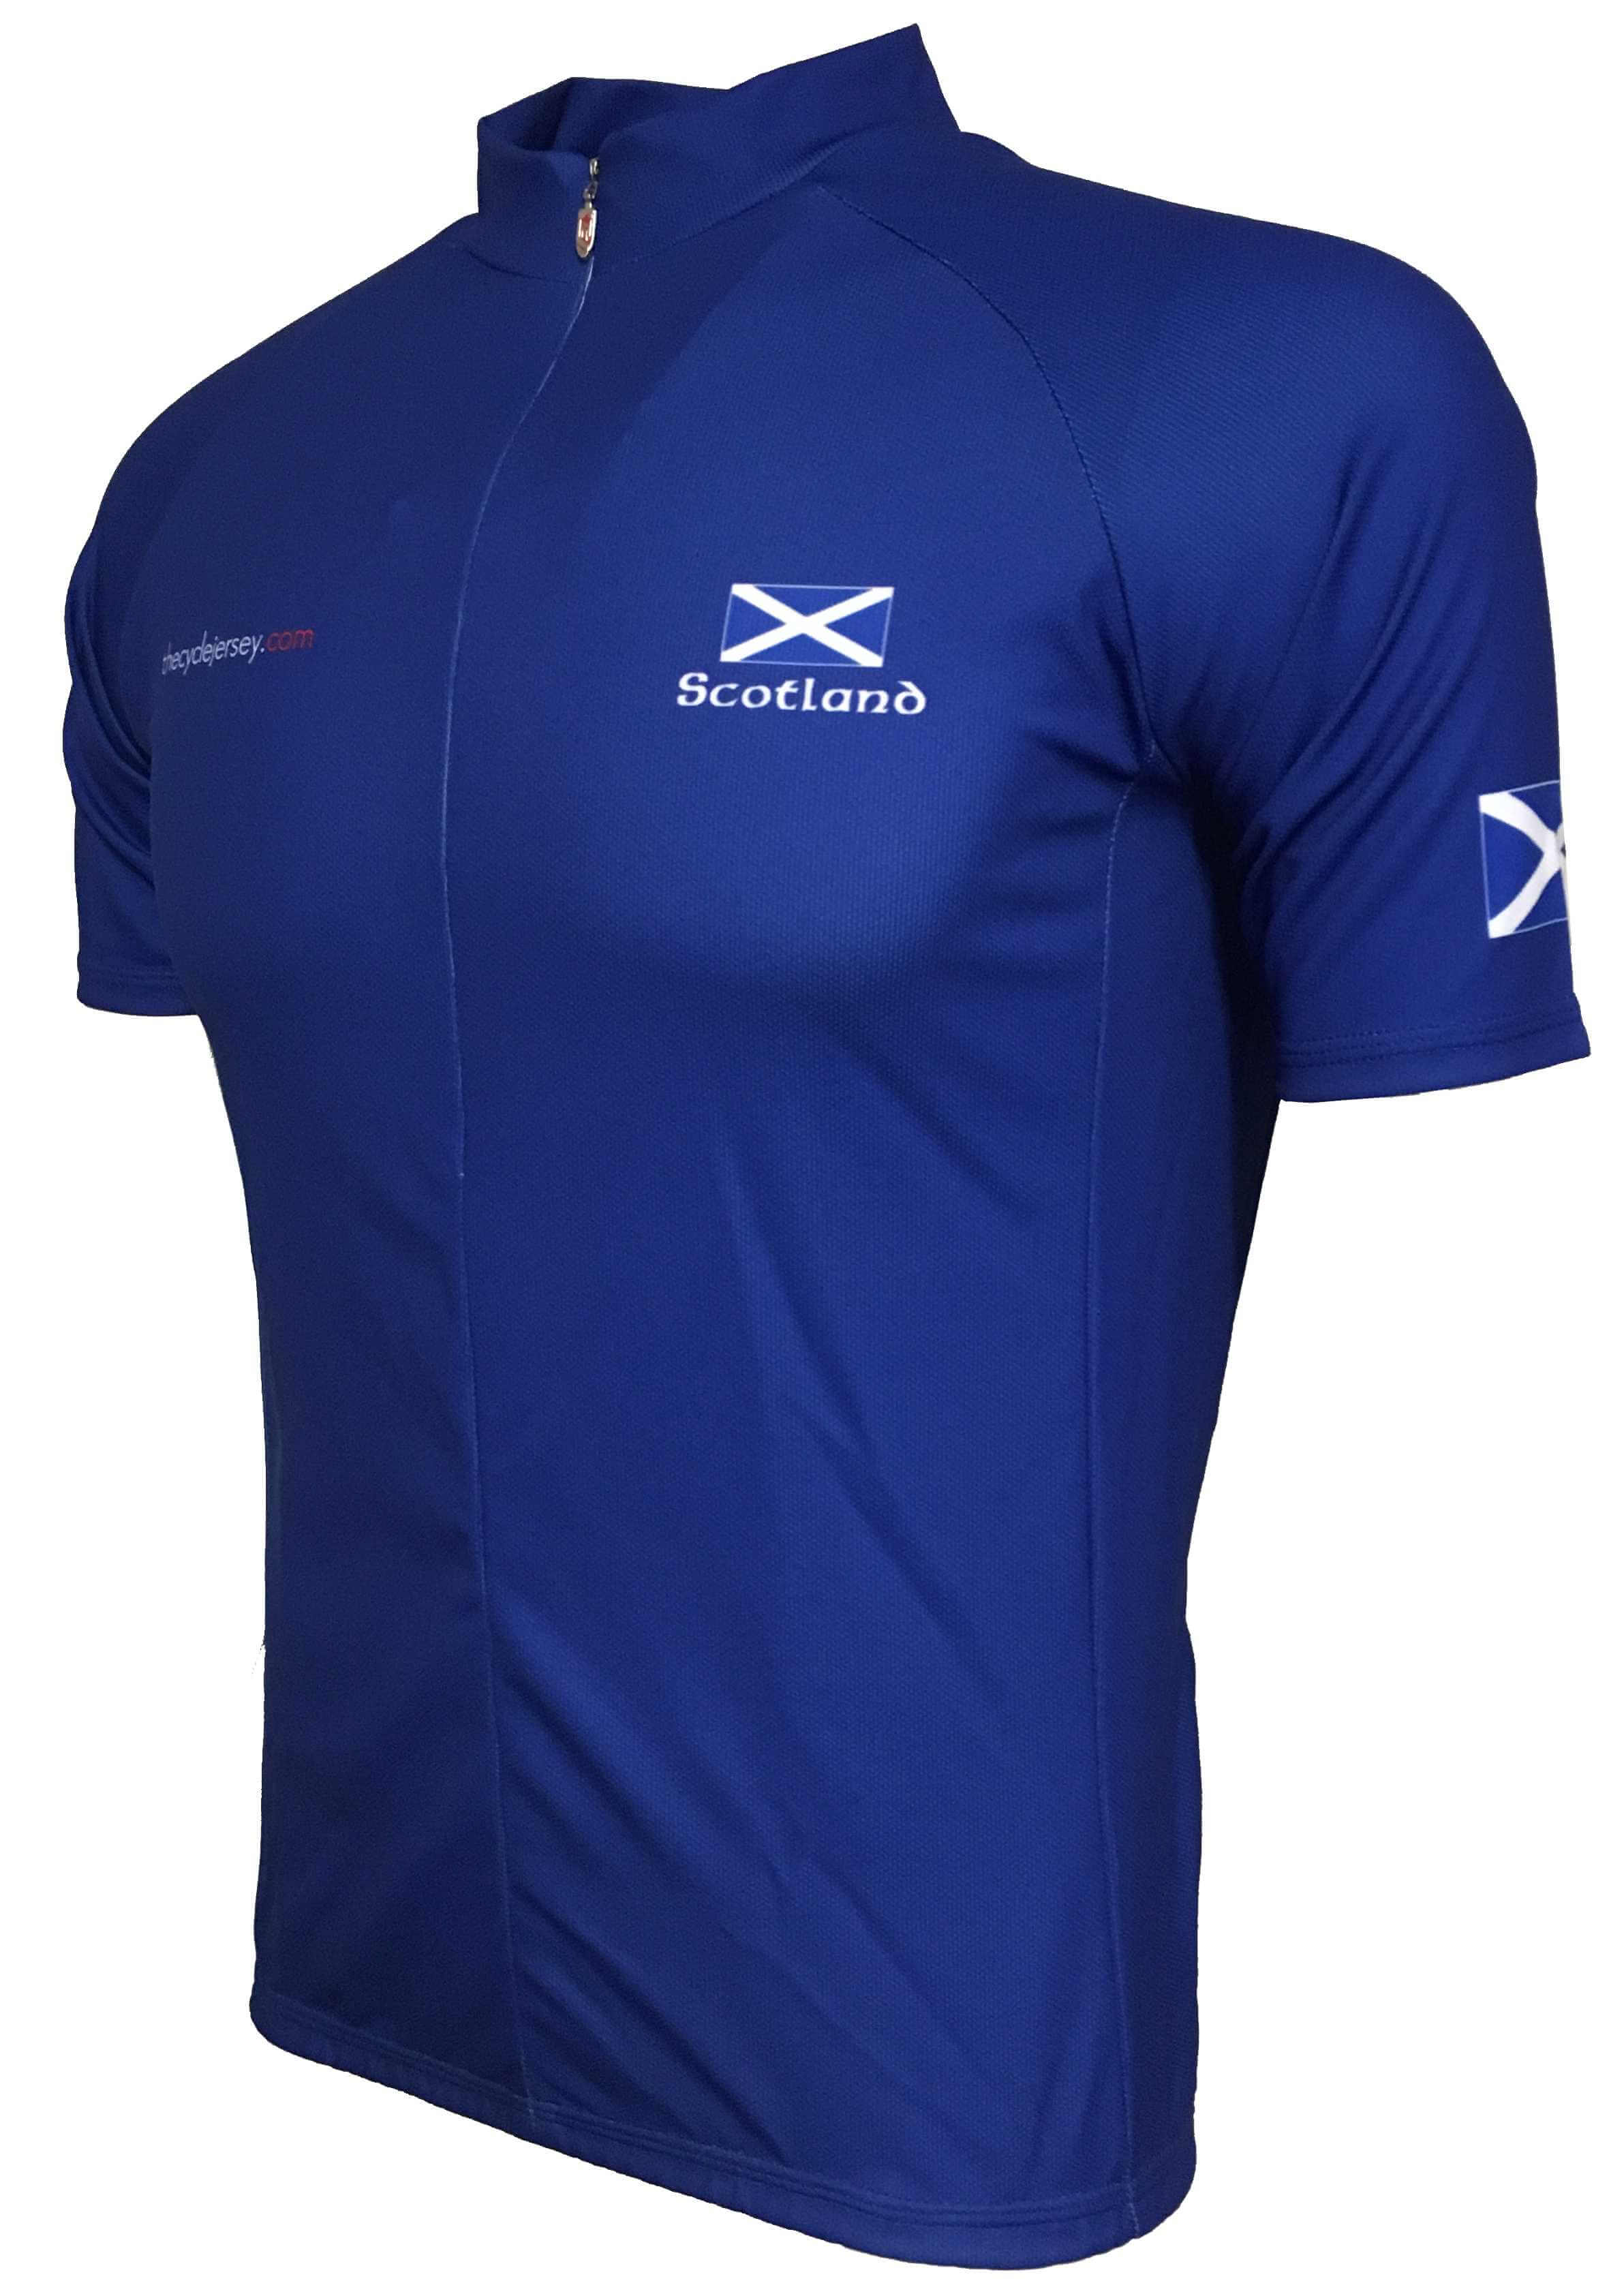 Scotland Original Road Cycle Jersey Front